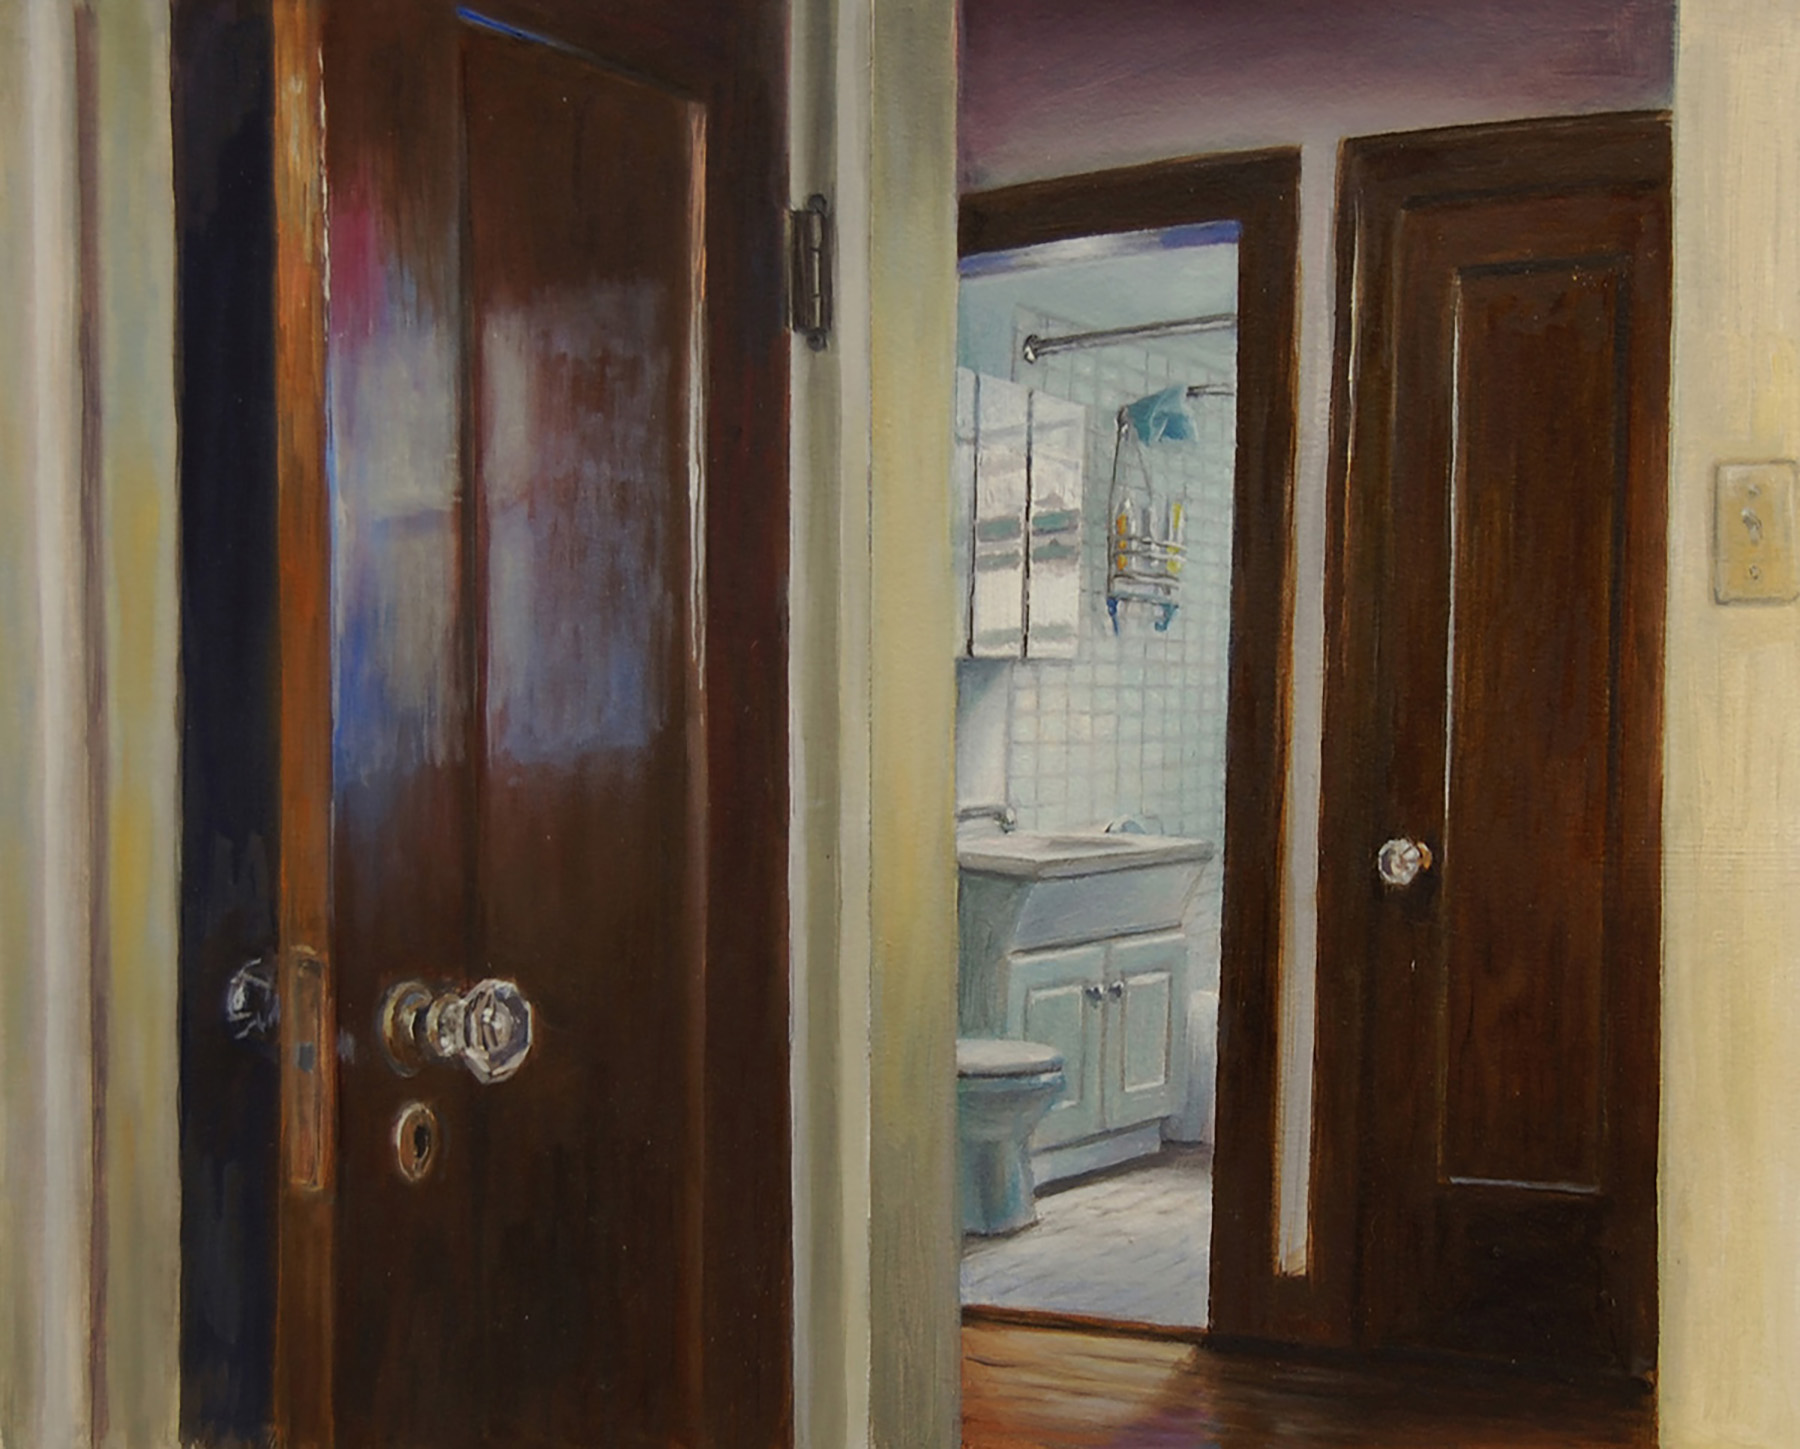   Closet Doors and Bathroom   2011  Oil on paper  12 x 15 inches       